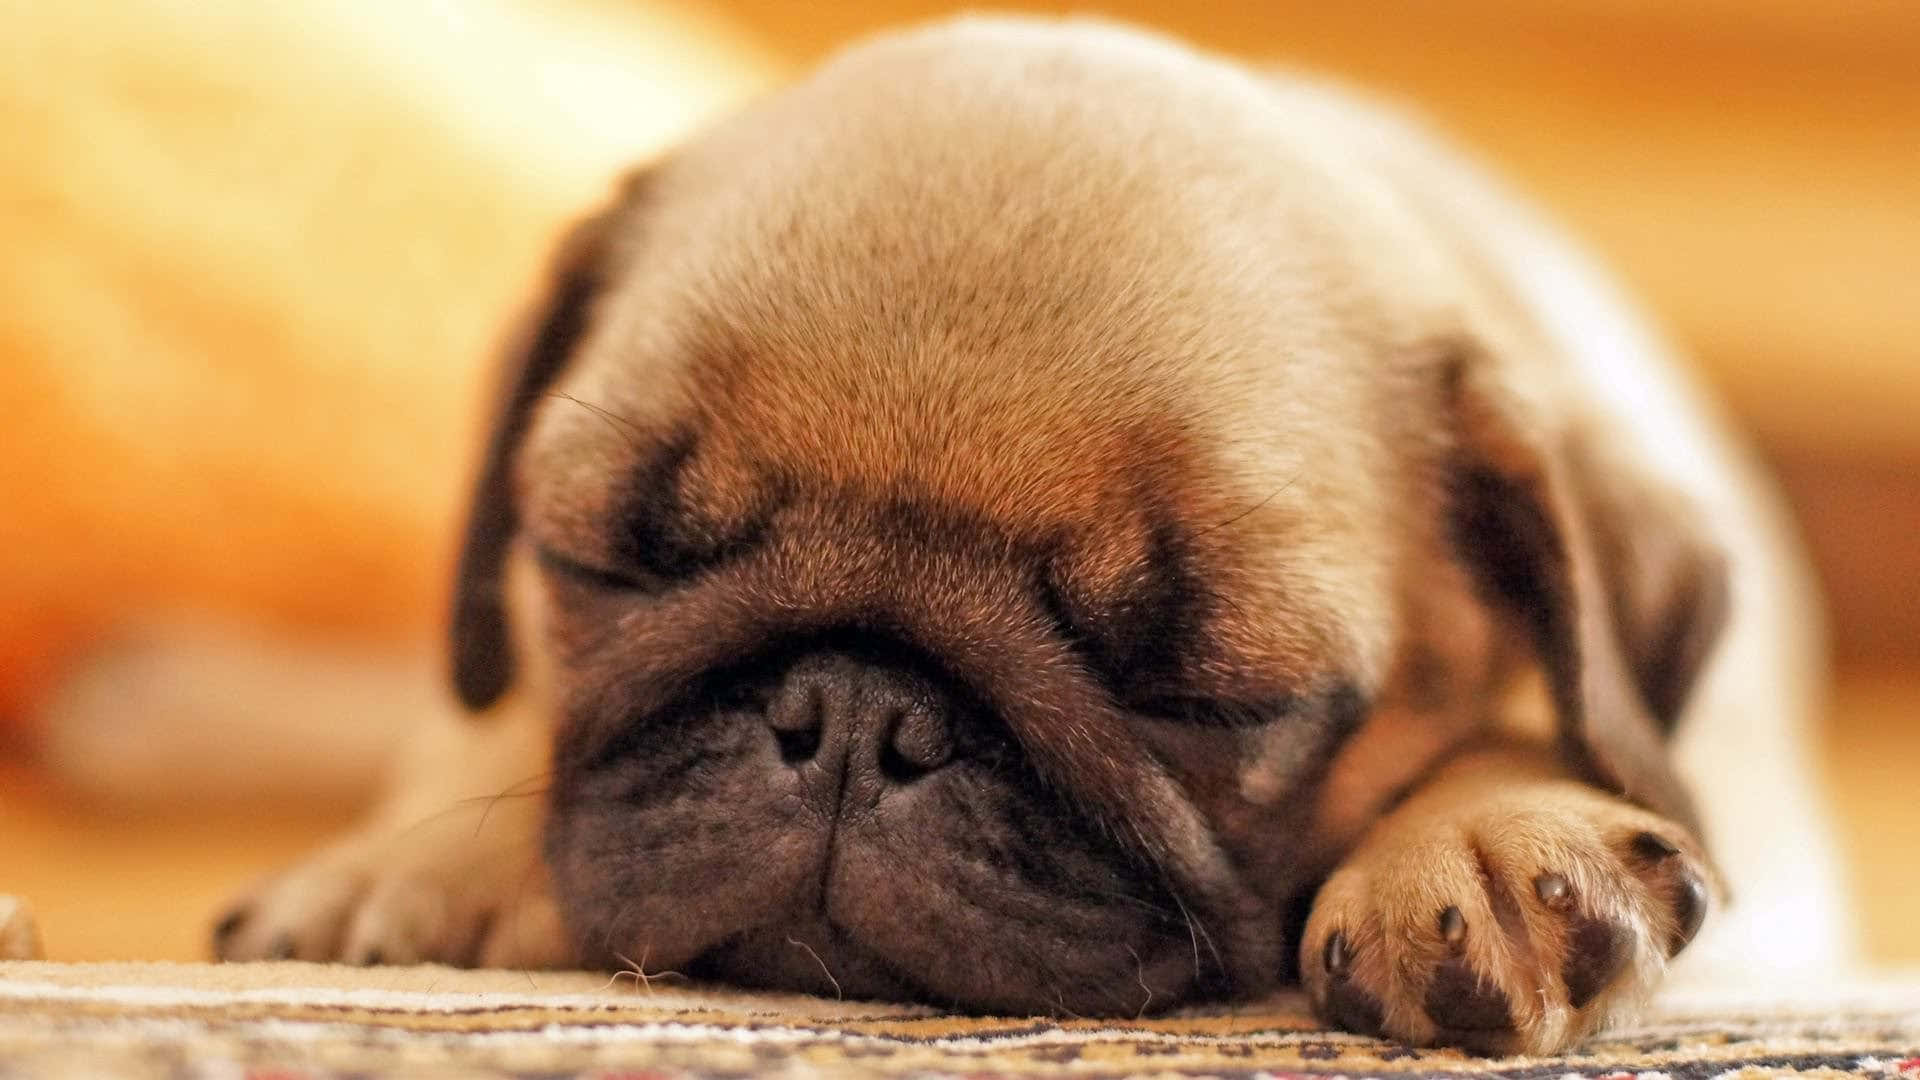 Cute Baby Pug Sleeping Picture